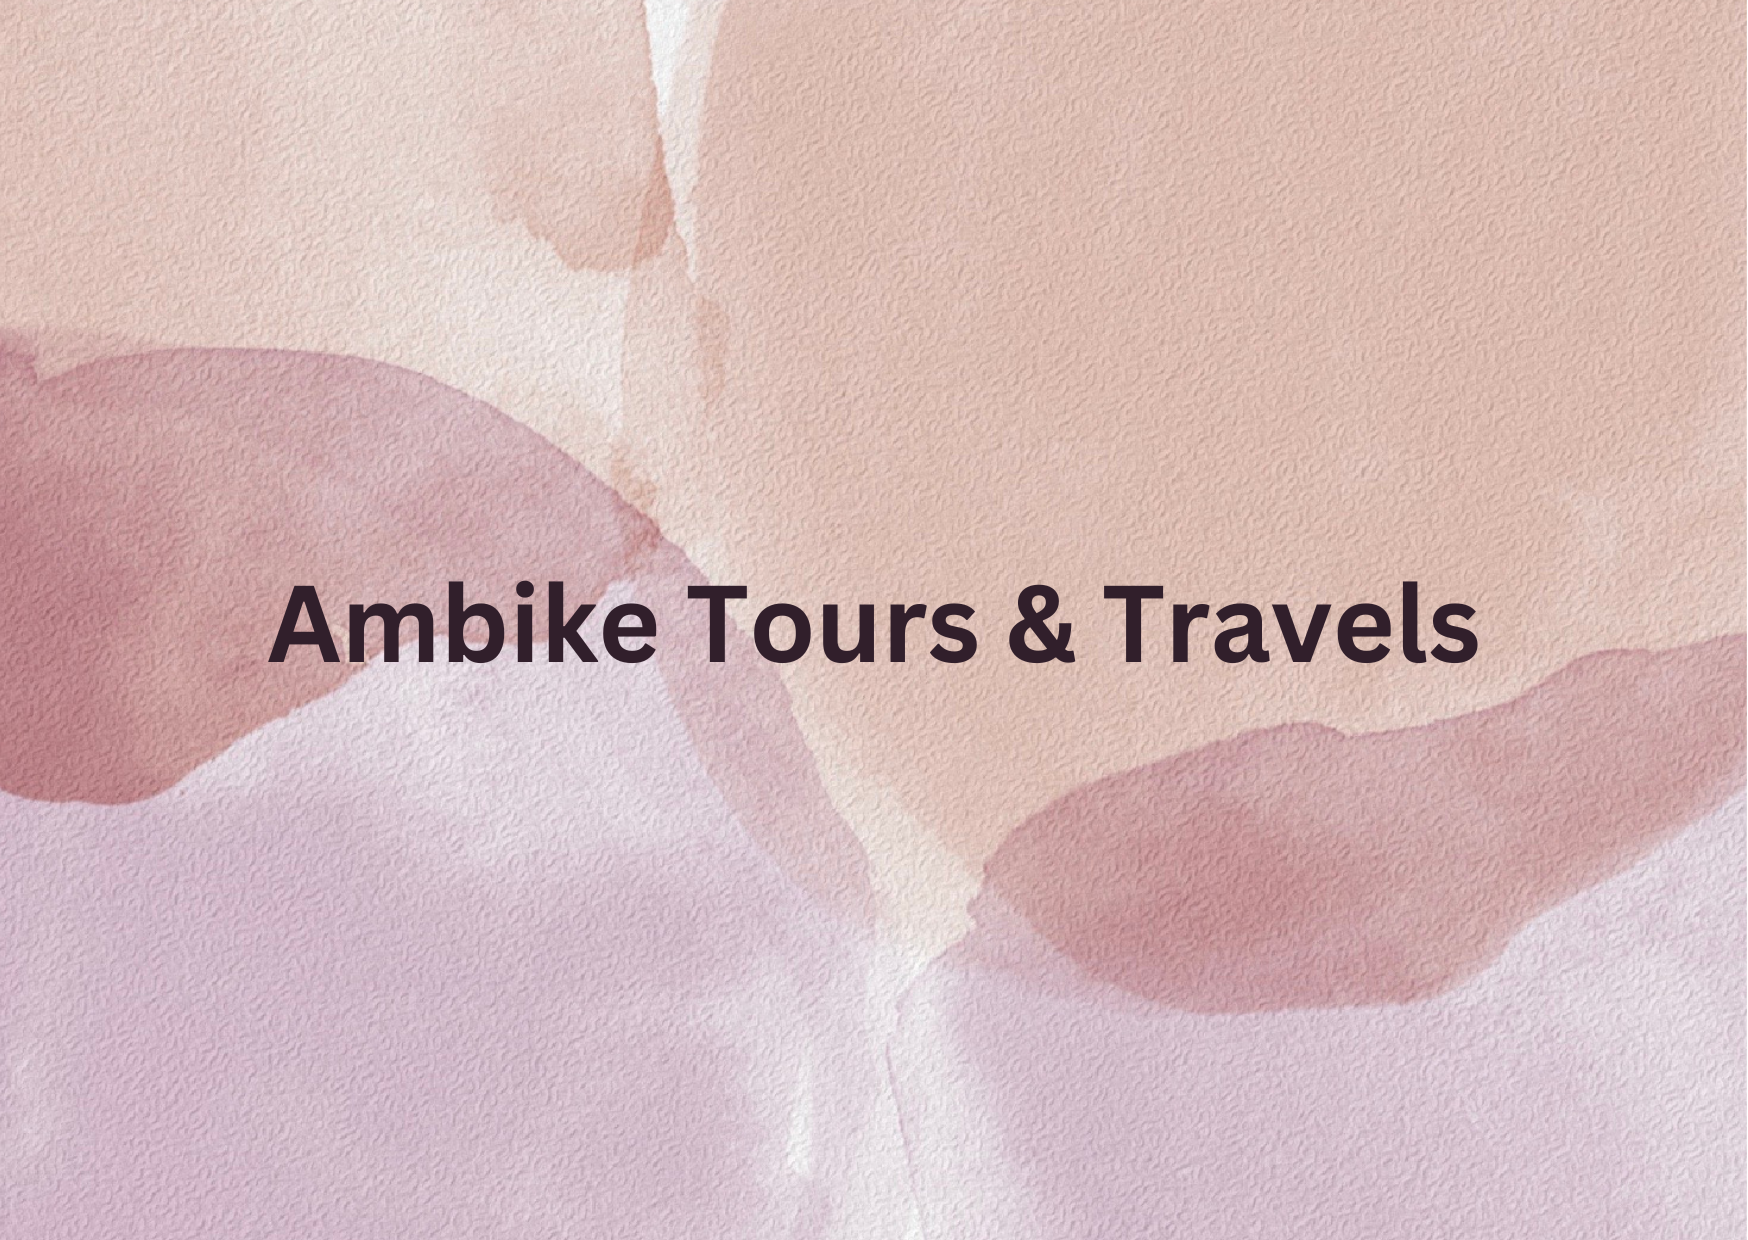 Ambike Tours & Travels  